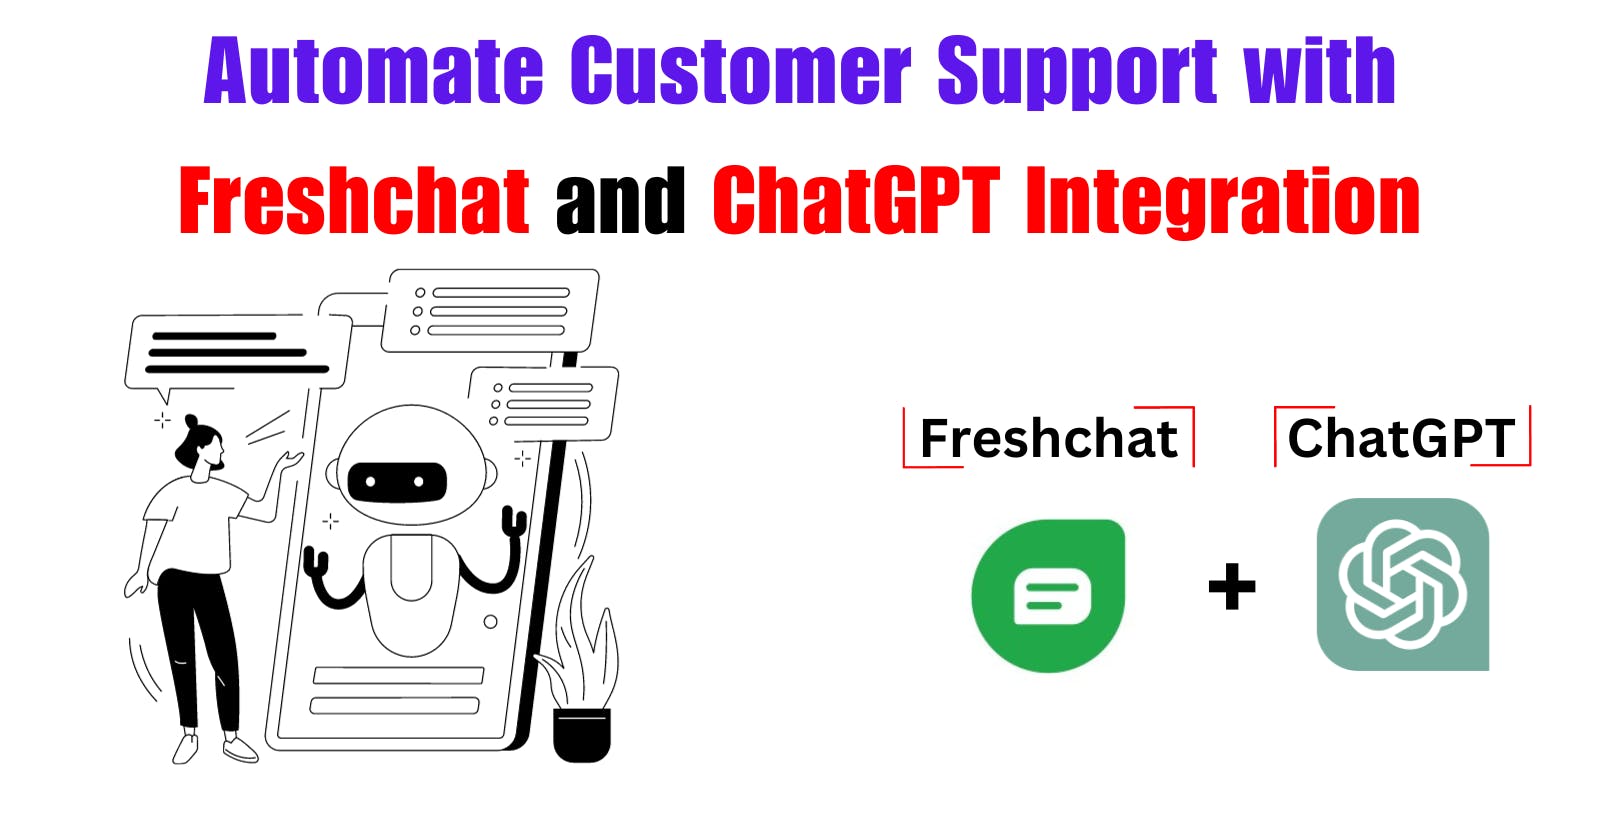 Automate Customer Support with Freshchat and ChatGPT Integration